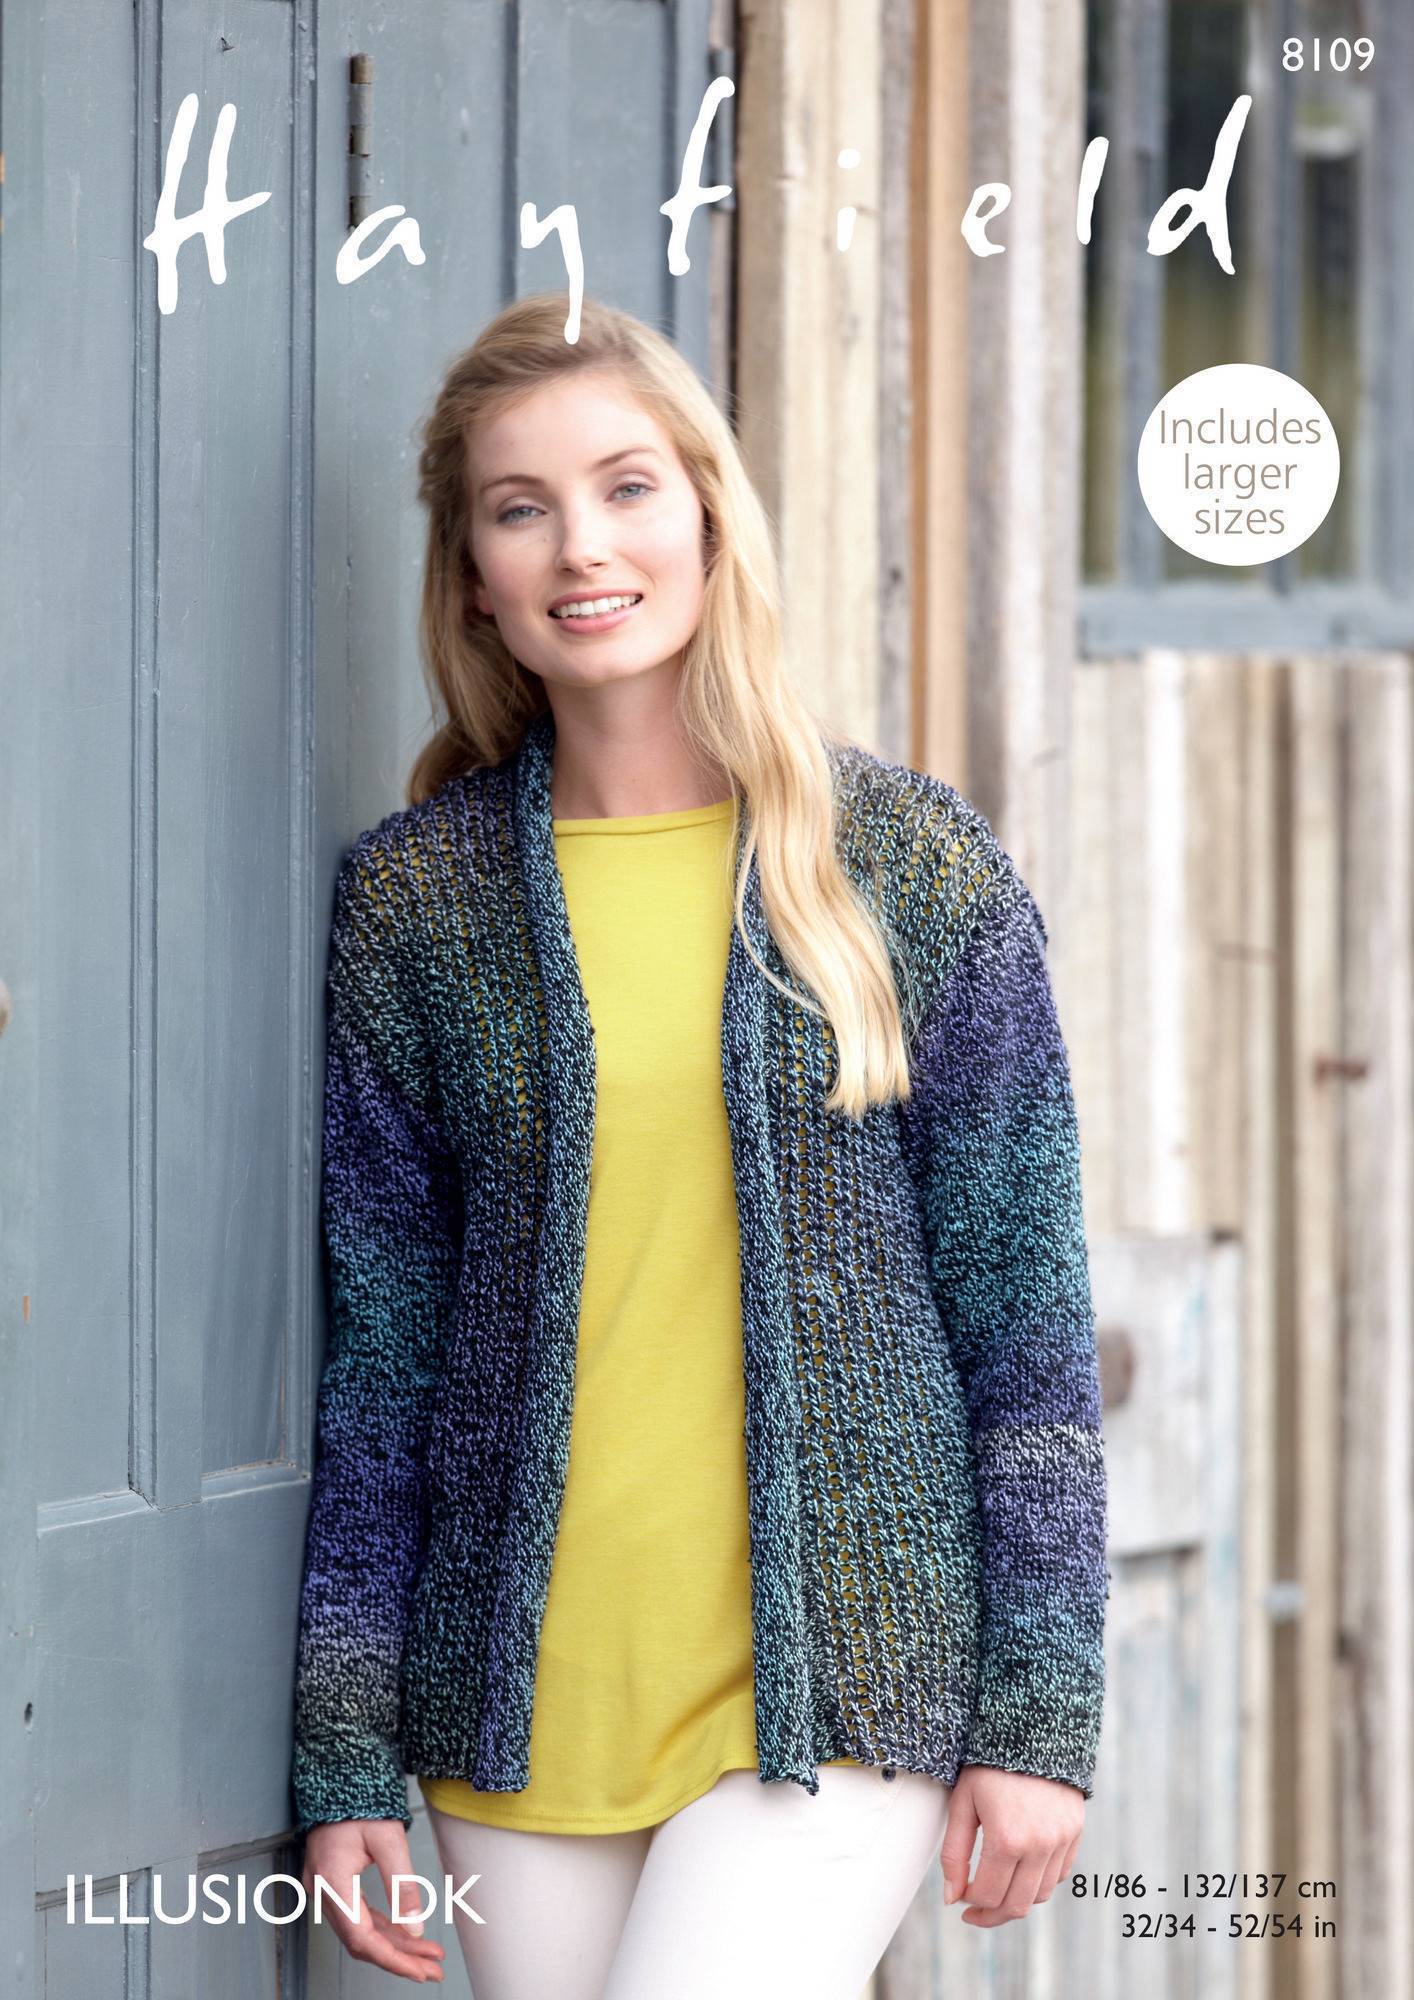 Jacket in Hayfield Illusion DK (8109) | The Knitting Network